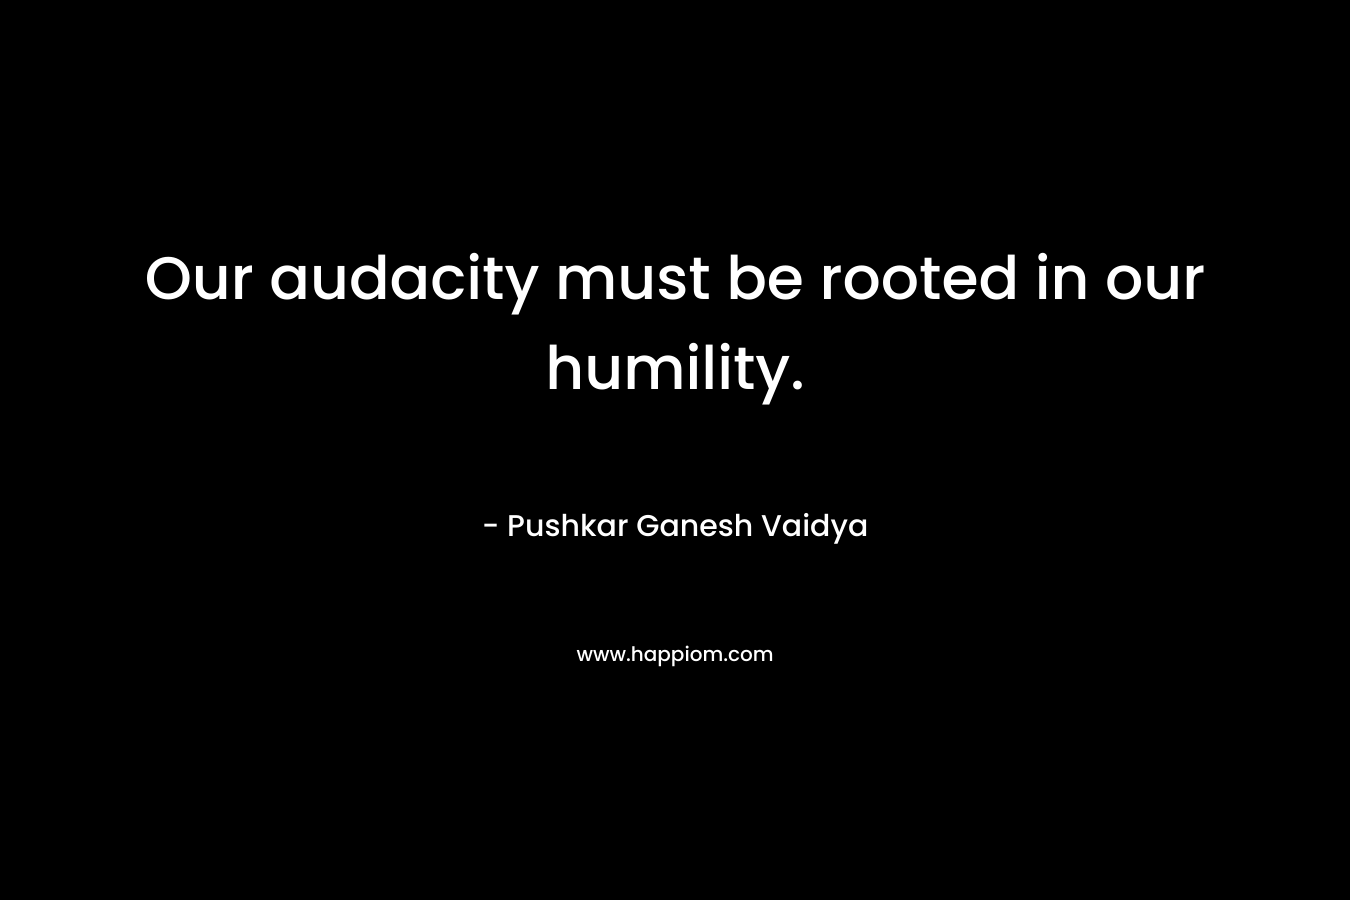 Our audacity must be rooted in our humility.